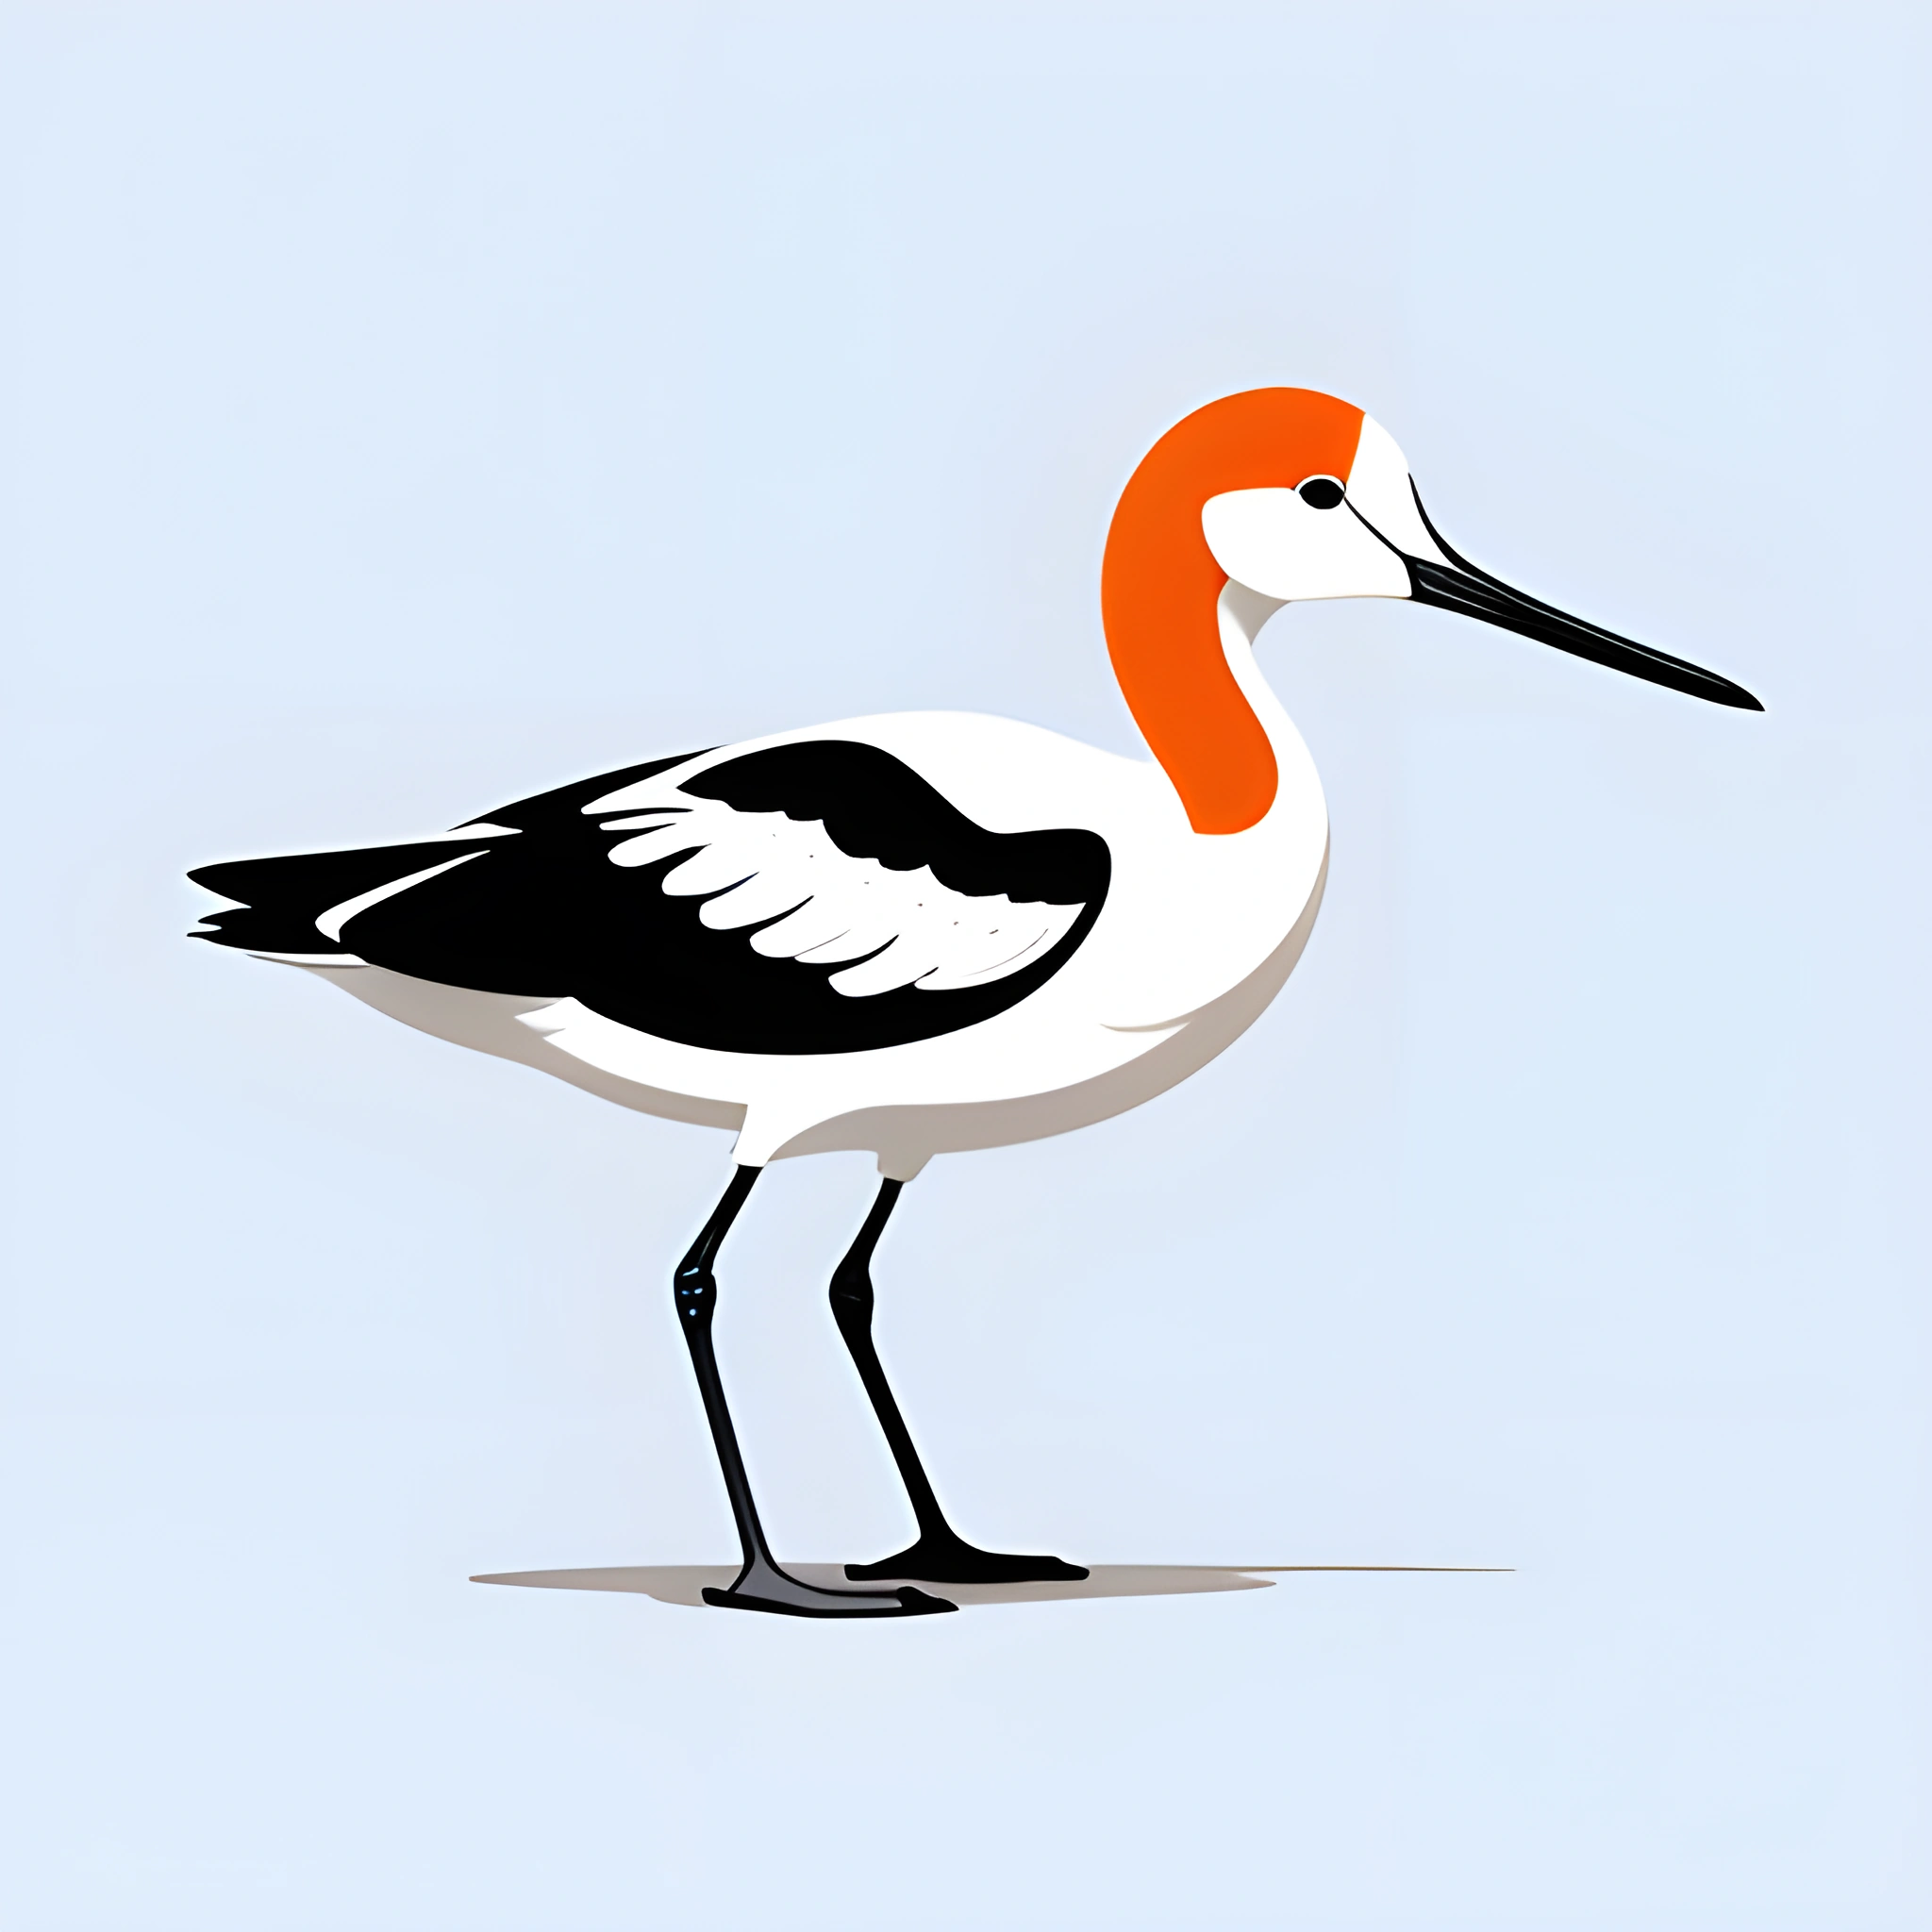 a bird with a long beak standing on a white surface